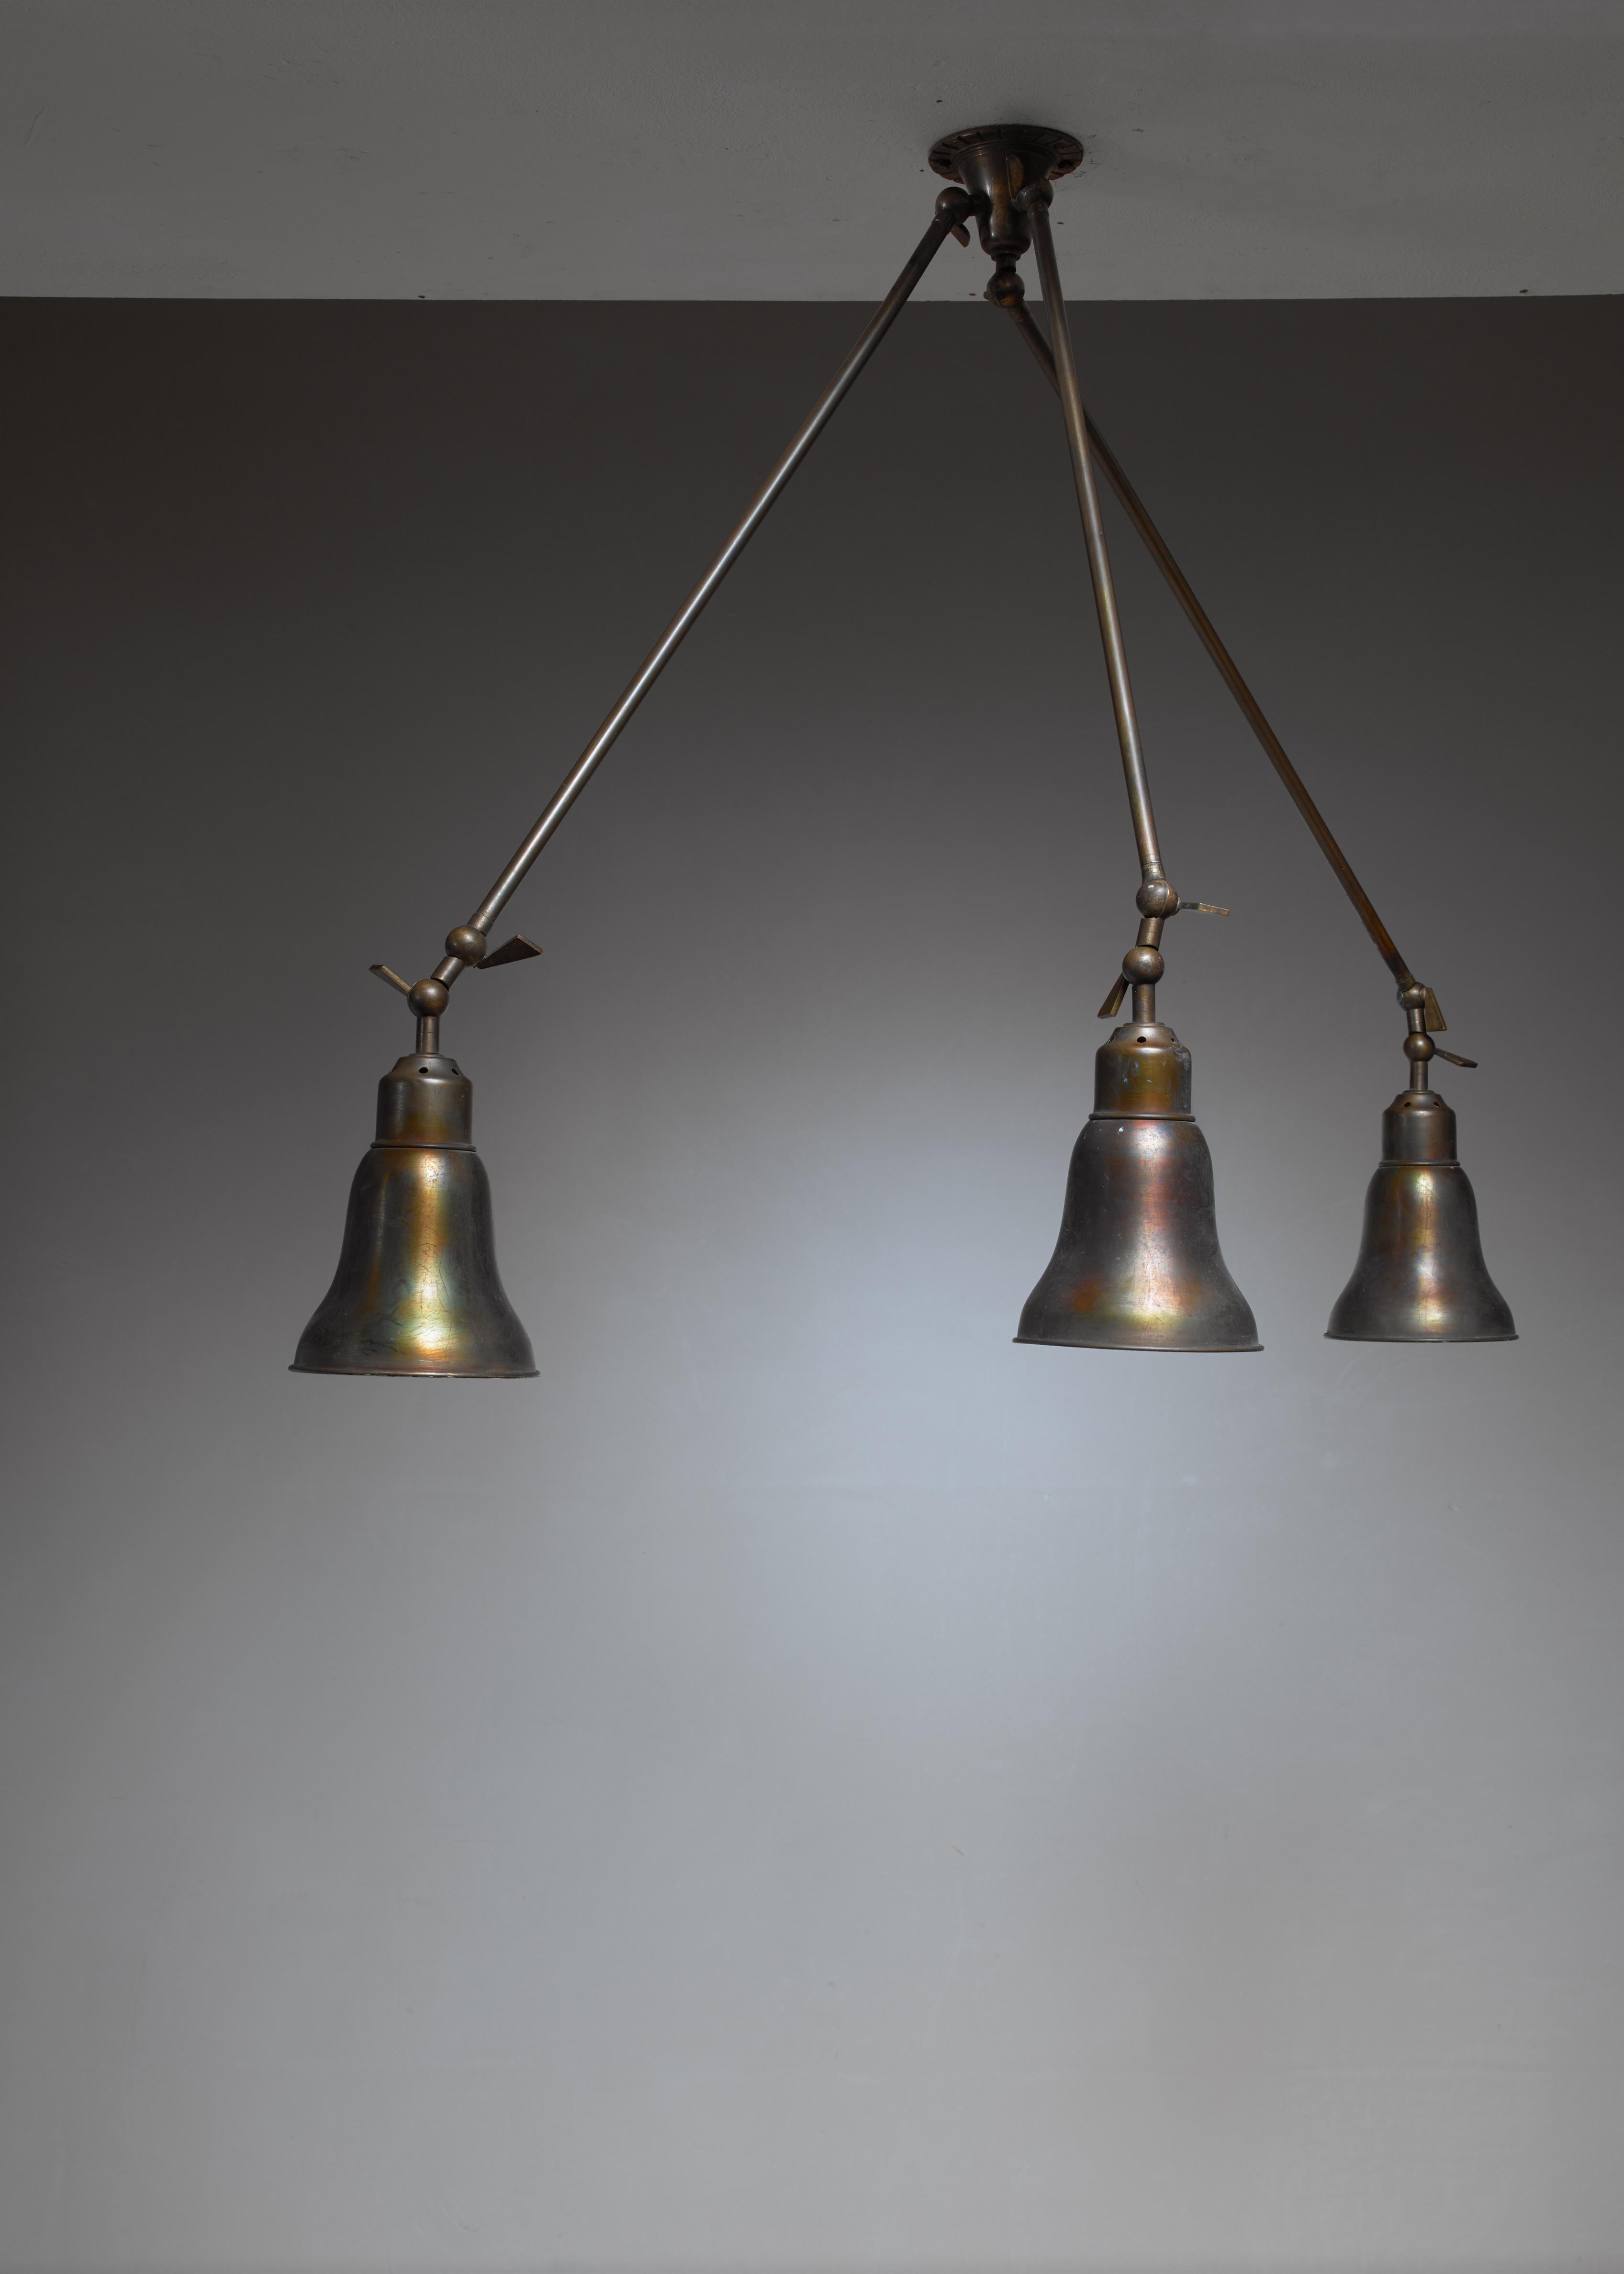 An Italian brass ceiling or wall lamp with three arms extending from the mount. Both the arms and shades are adjustable at three points. The shades have a 15 cm diameter.

The brass is beautifully darkened from age.